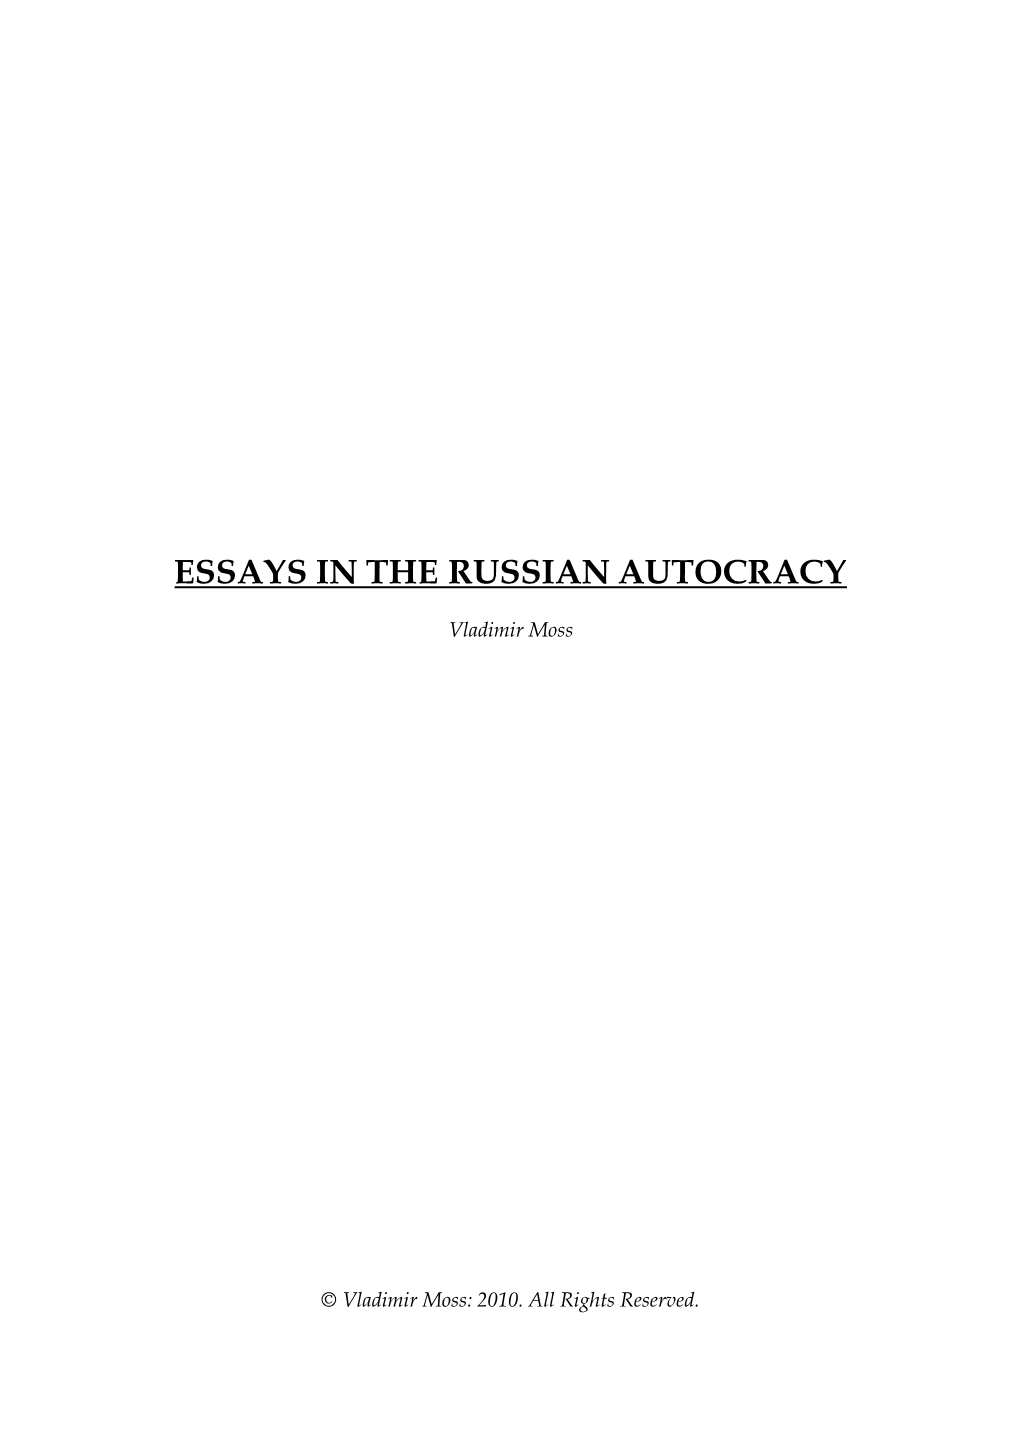 Essays in the Russian Autocracy